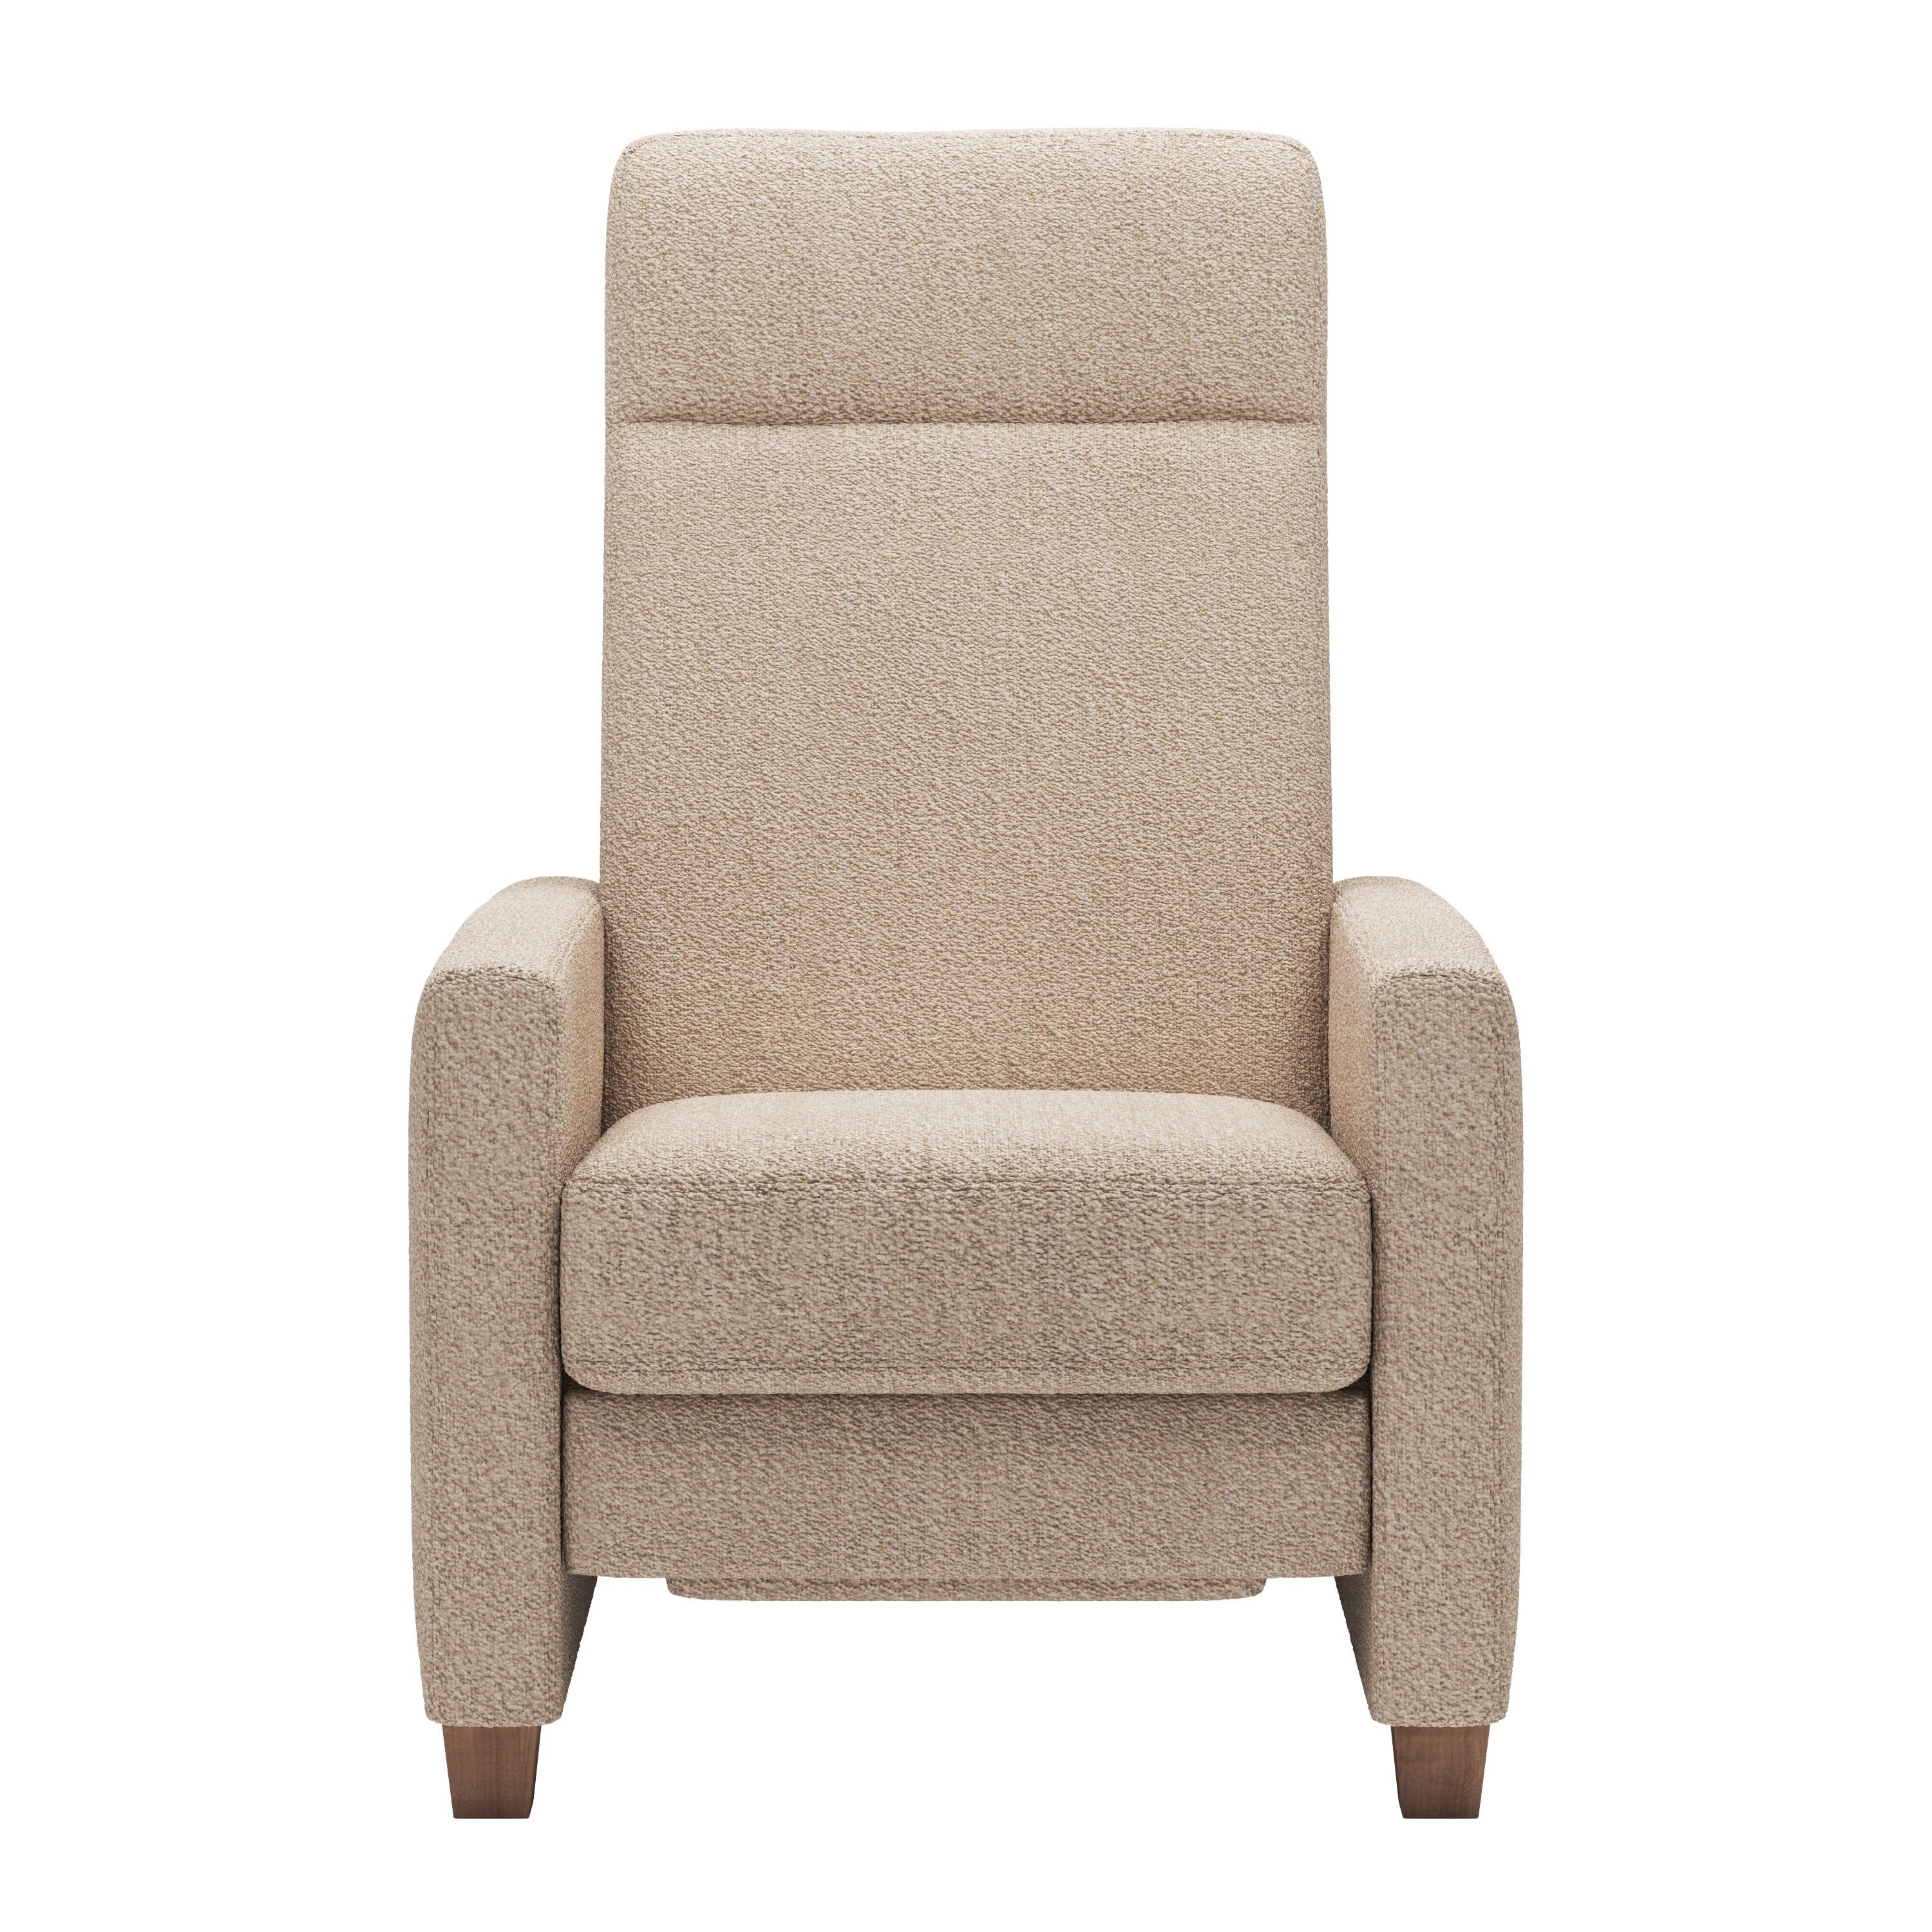 Home affaire Relaxfauteuil Hambers